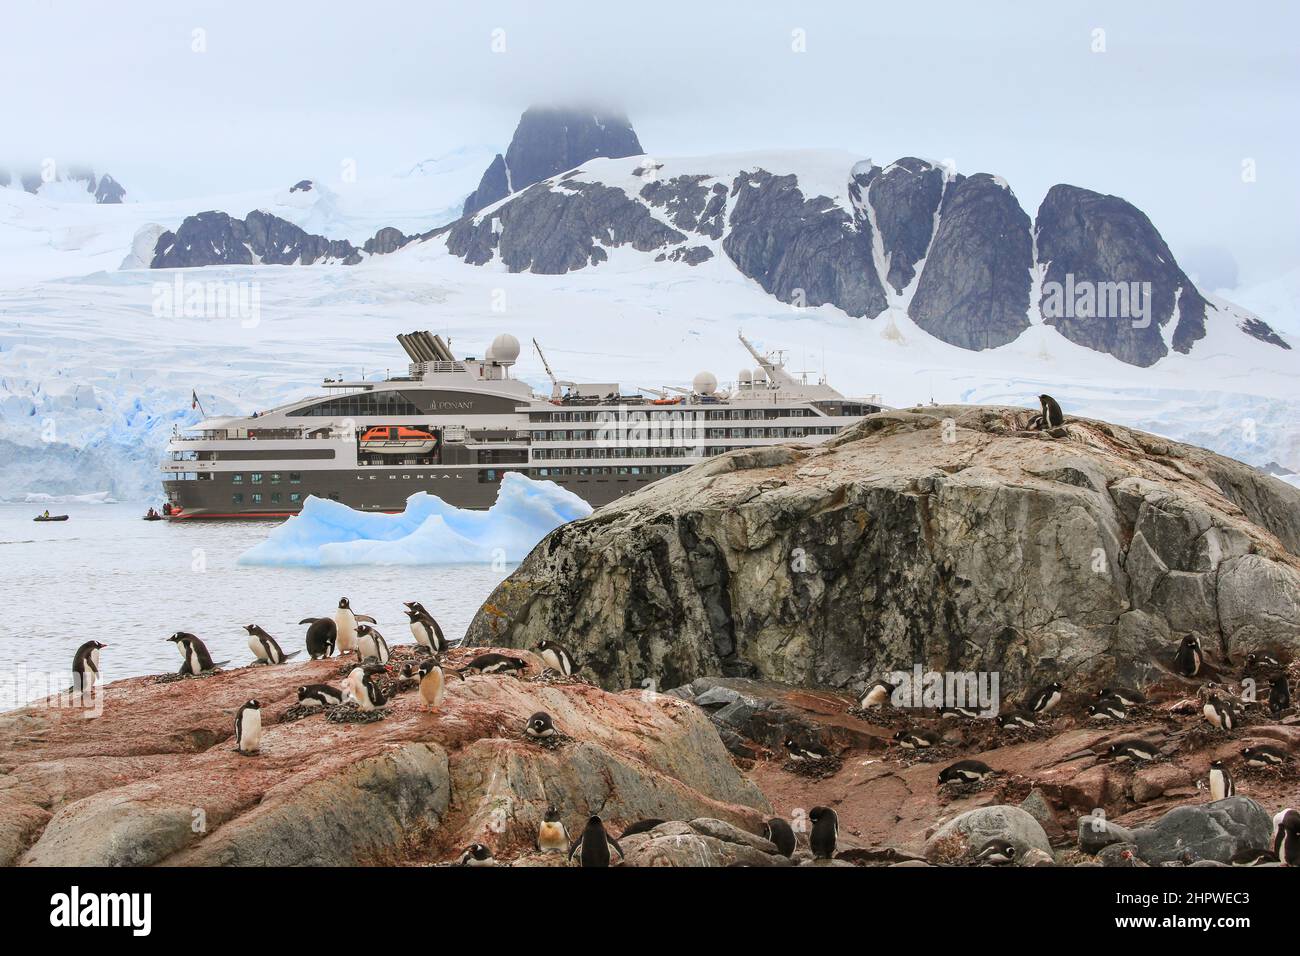 Gentoo penguins nesting on the rocky shoreline of Petermann Island, Antarctica, with the Le Boreal cruise ship and mountains in the background. Stock Photo